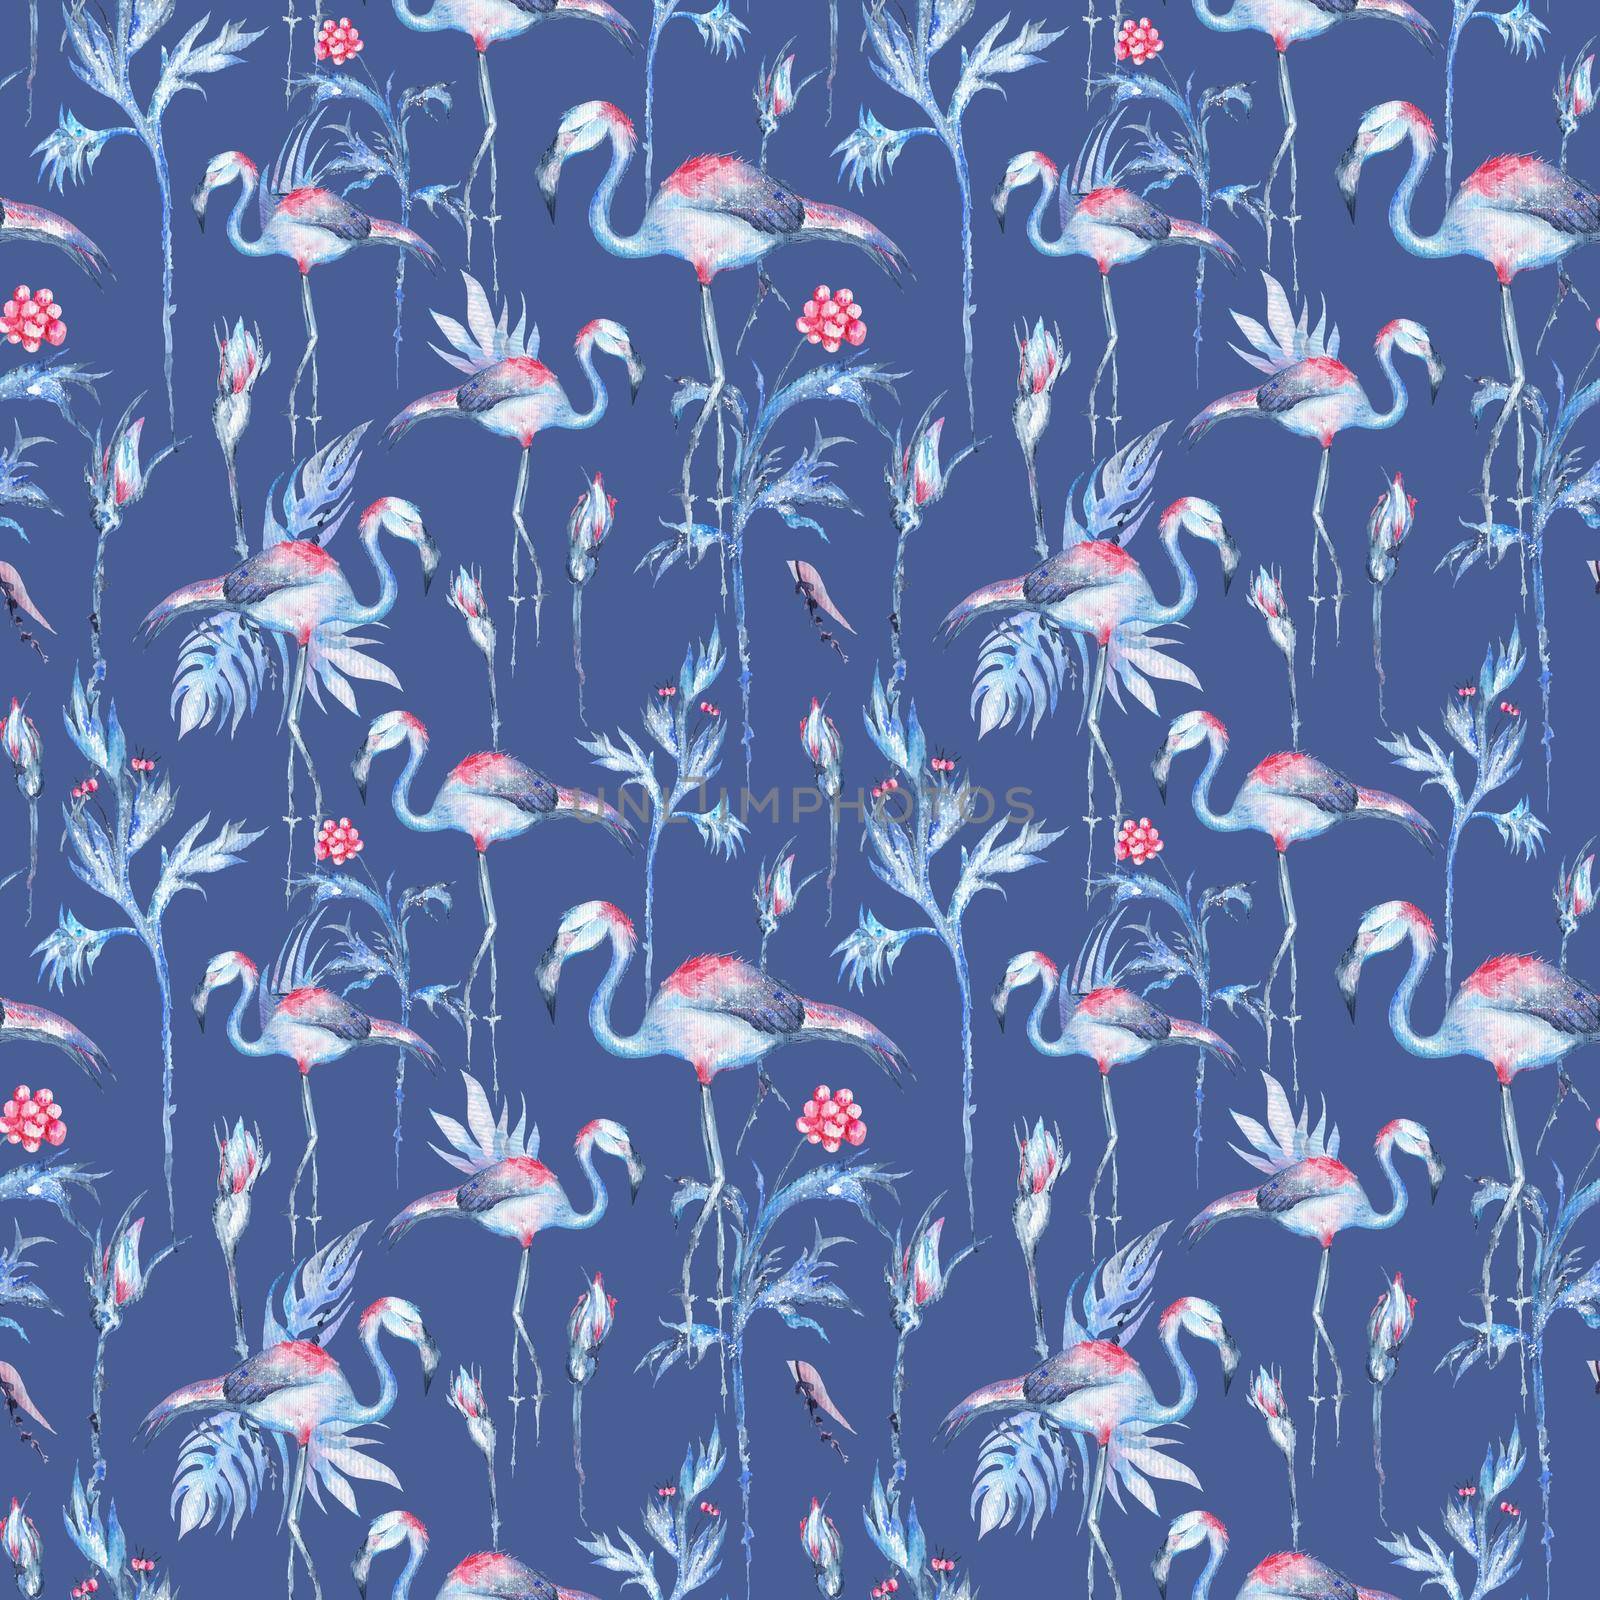 Seamless Watercolor texture with flamingo birds, plants and flowers for textile and wallpaper design